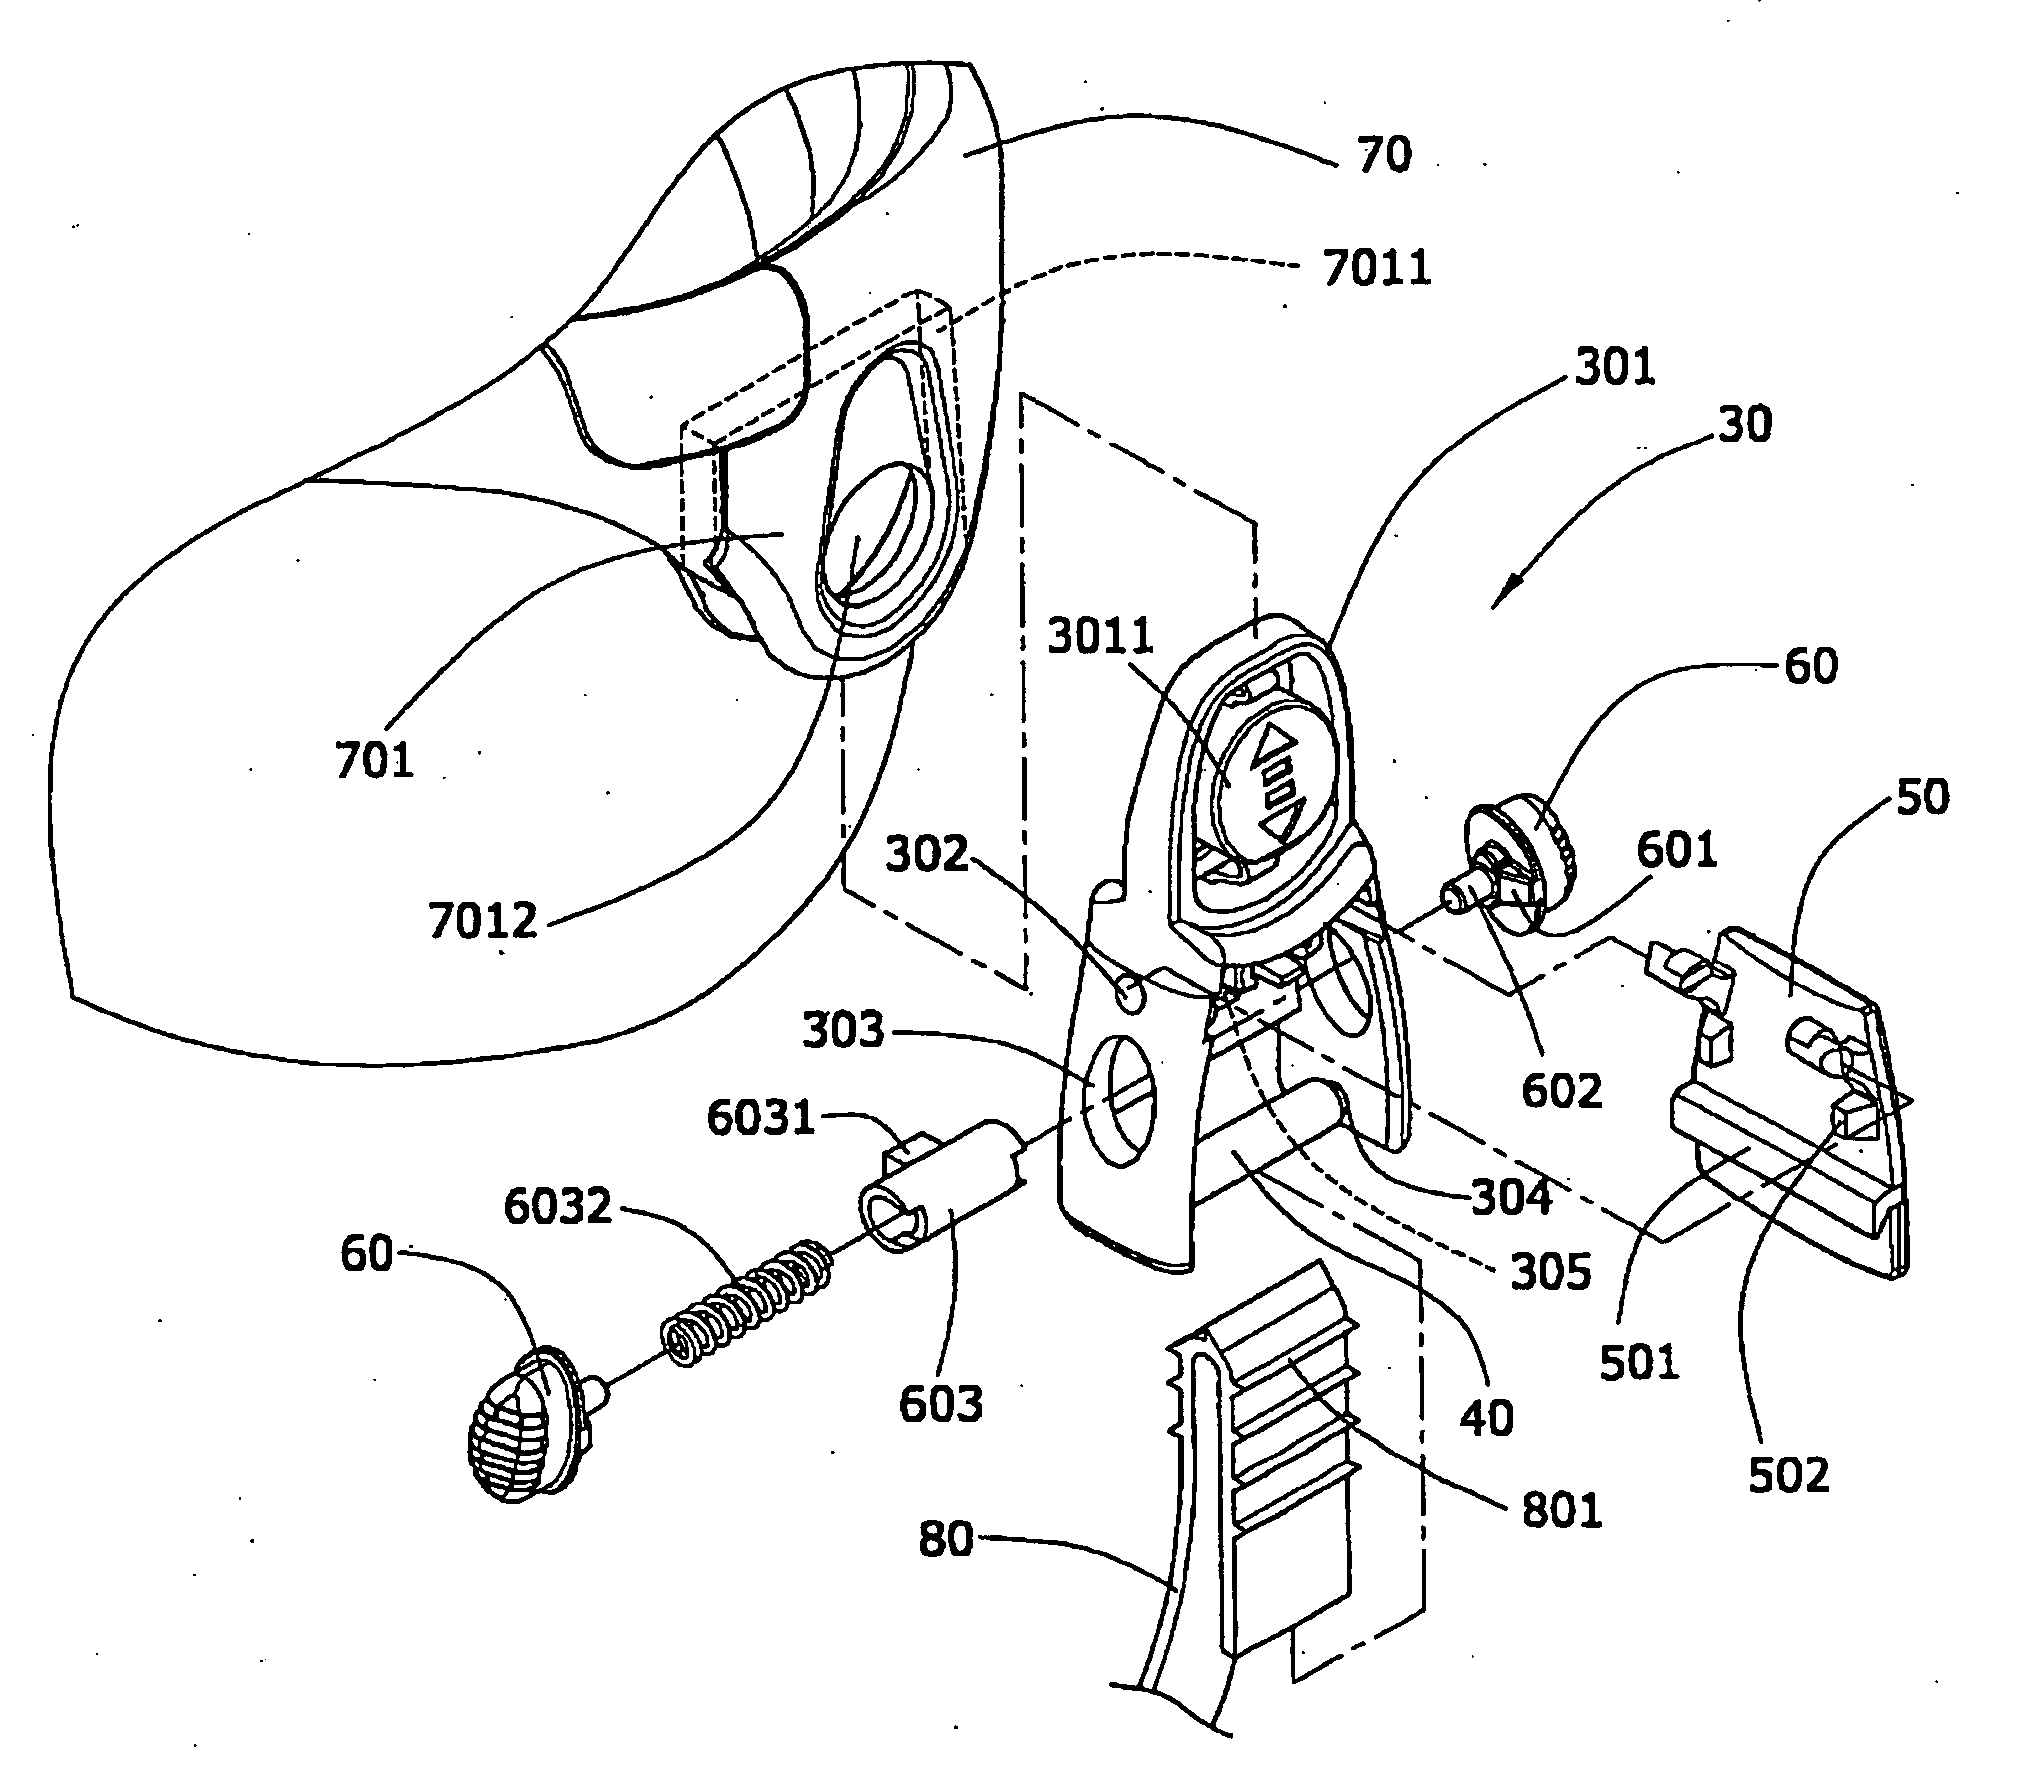 Adjusting Device for a Goggle Strap